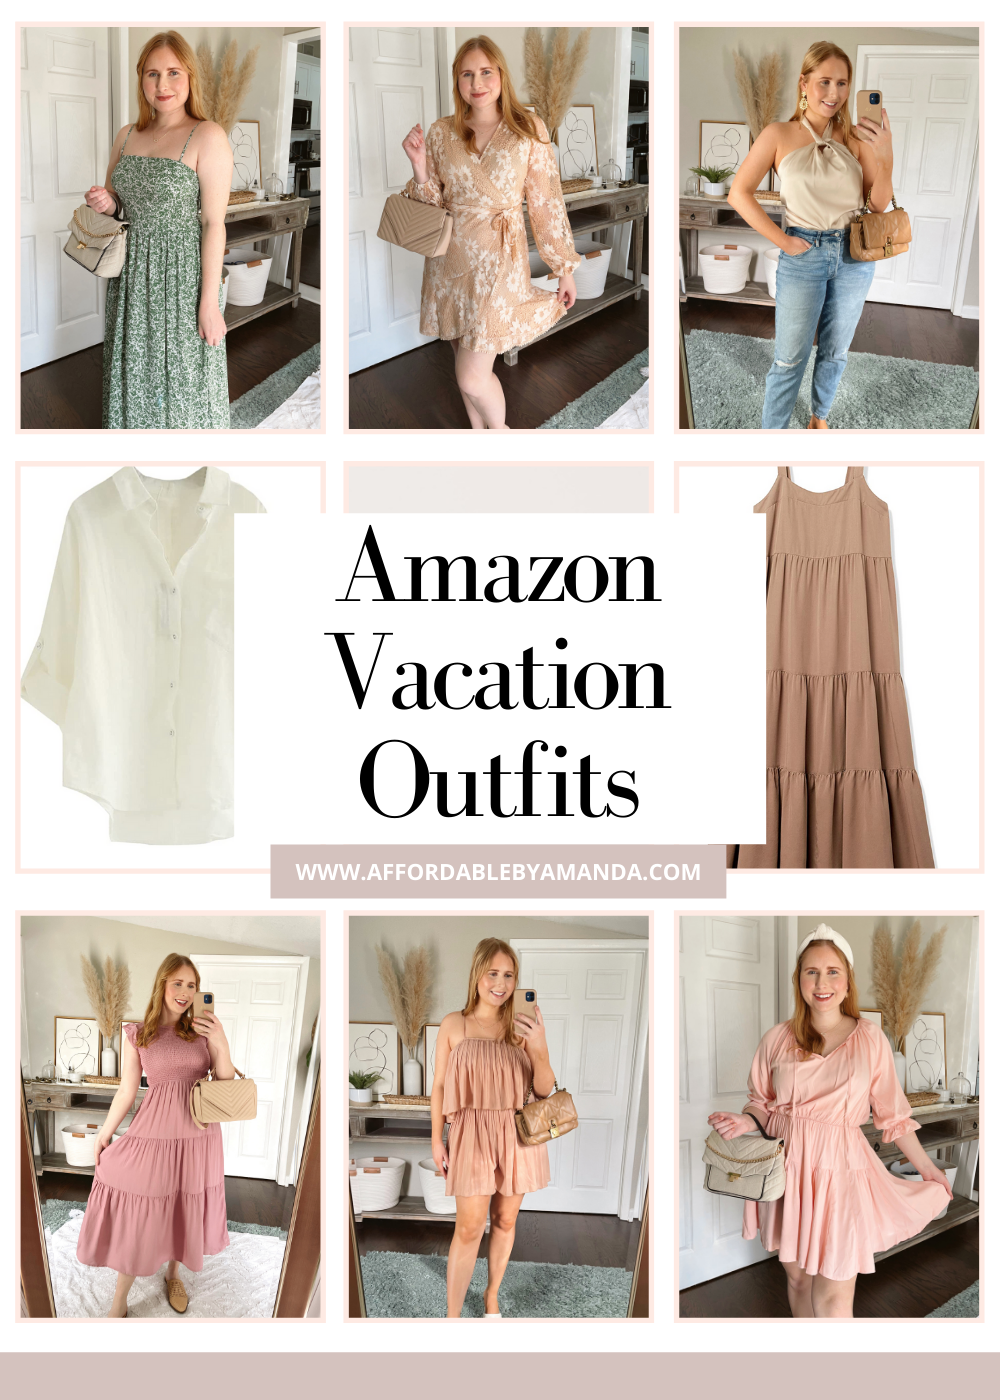 Amazon Vacation Outfits 2022 ...